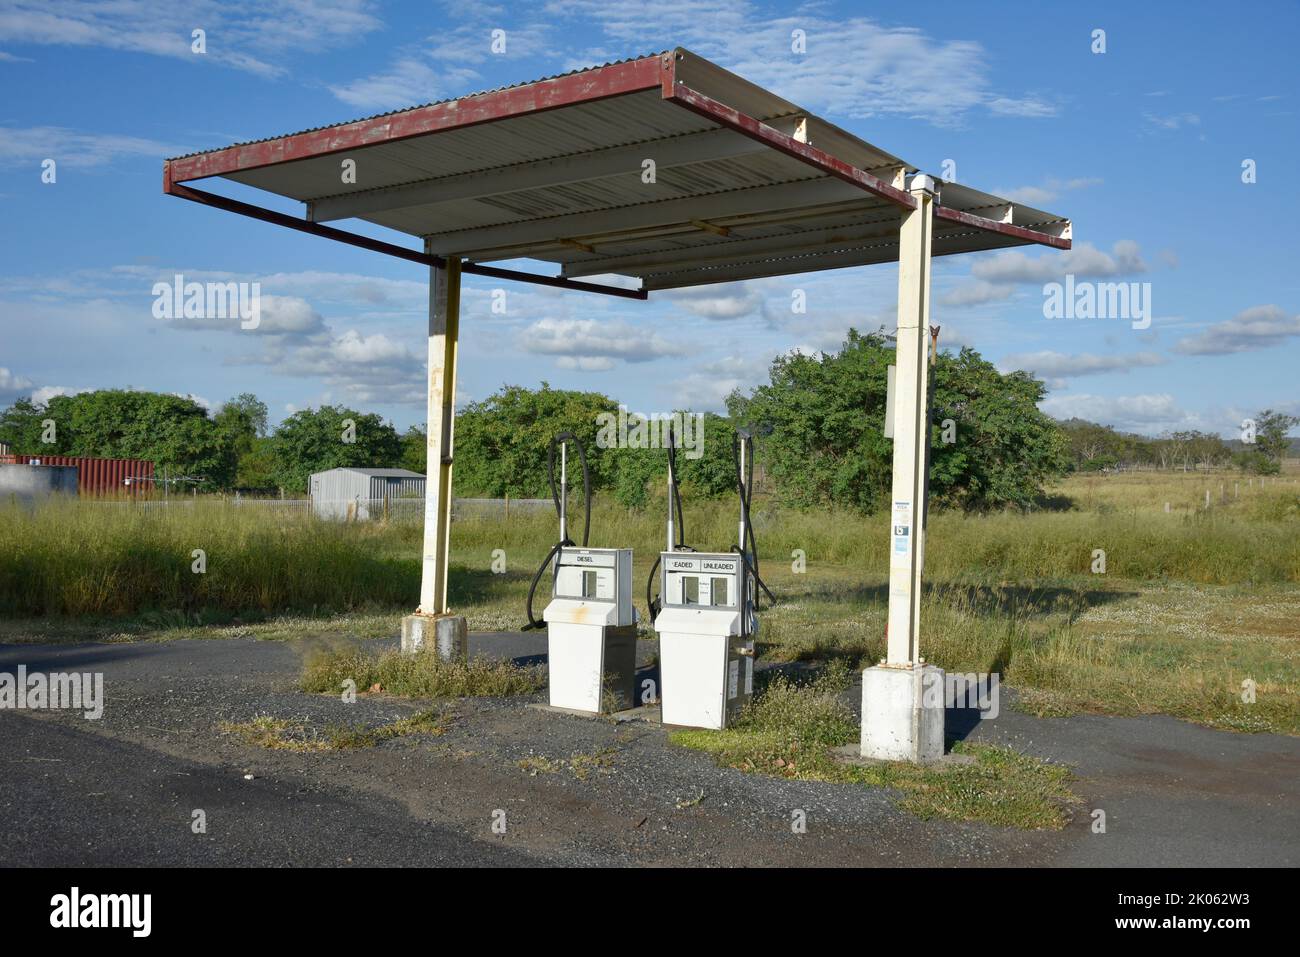 old abandoned fuel station and fruie and vegetable stall/shop outside Rockhampton in queensland, australia Stock Photo